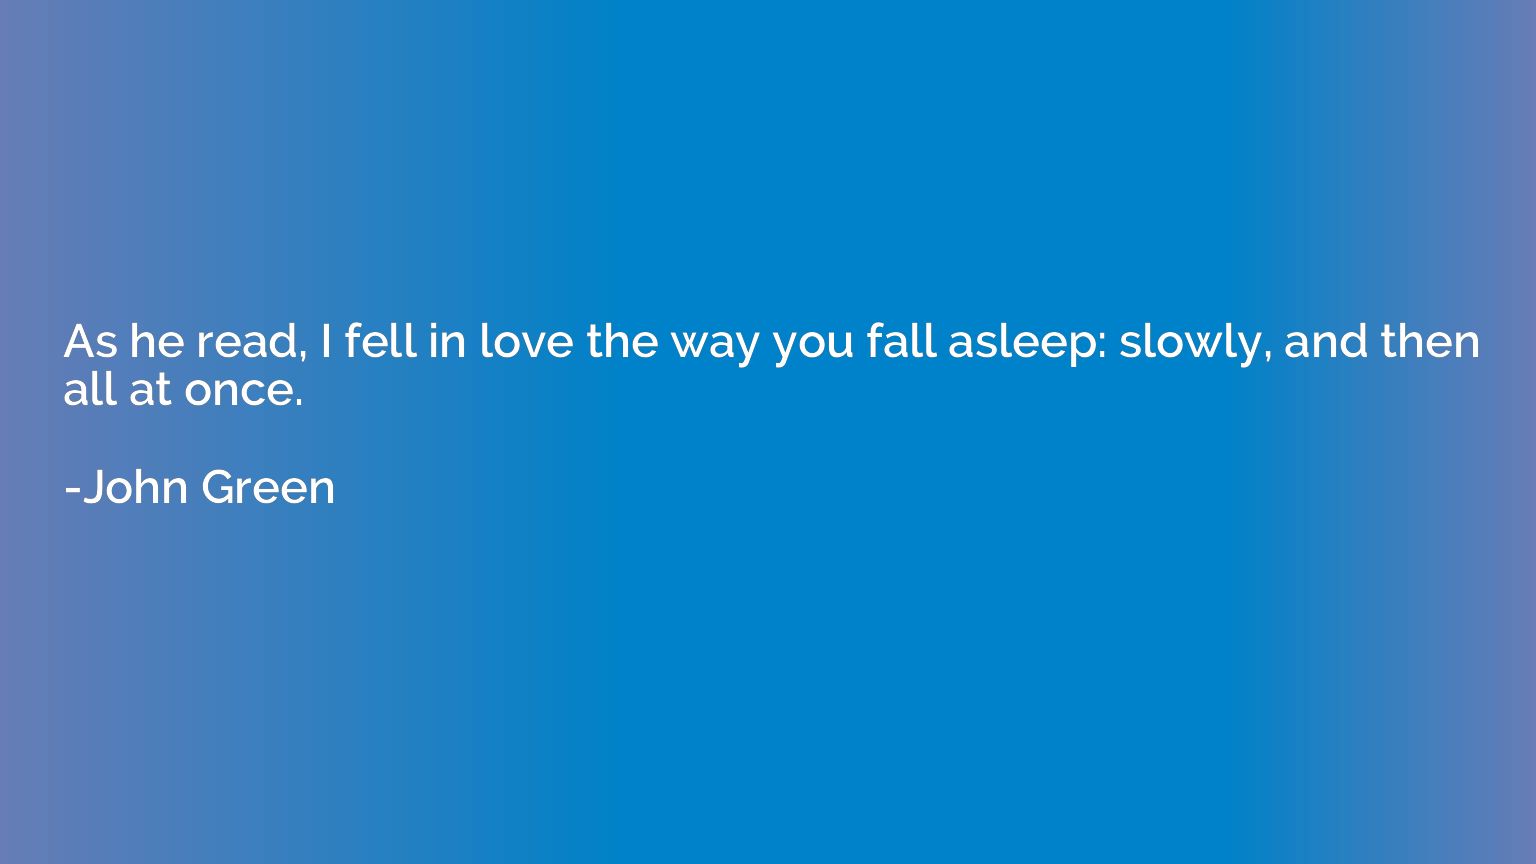 As he read, I fell in love the way you fall asleep: slowly, 